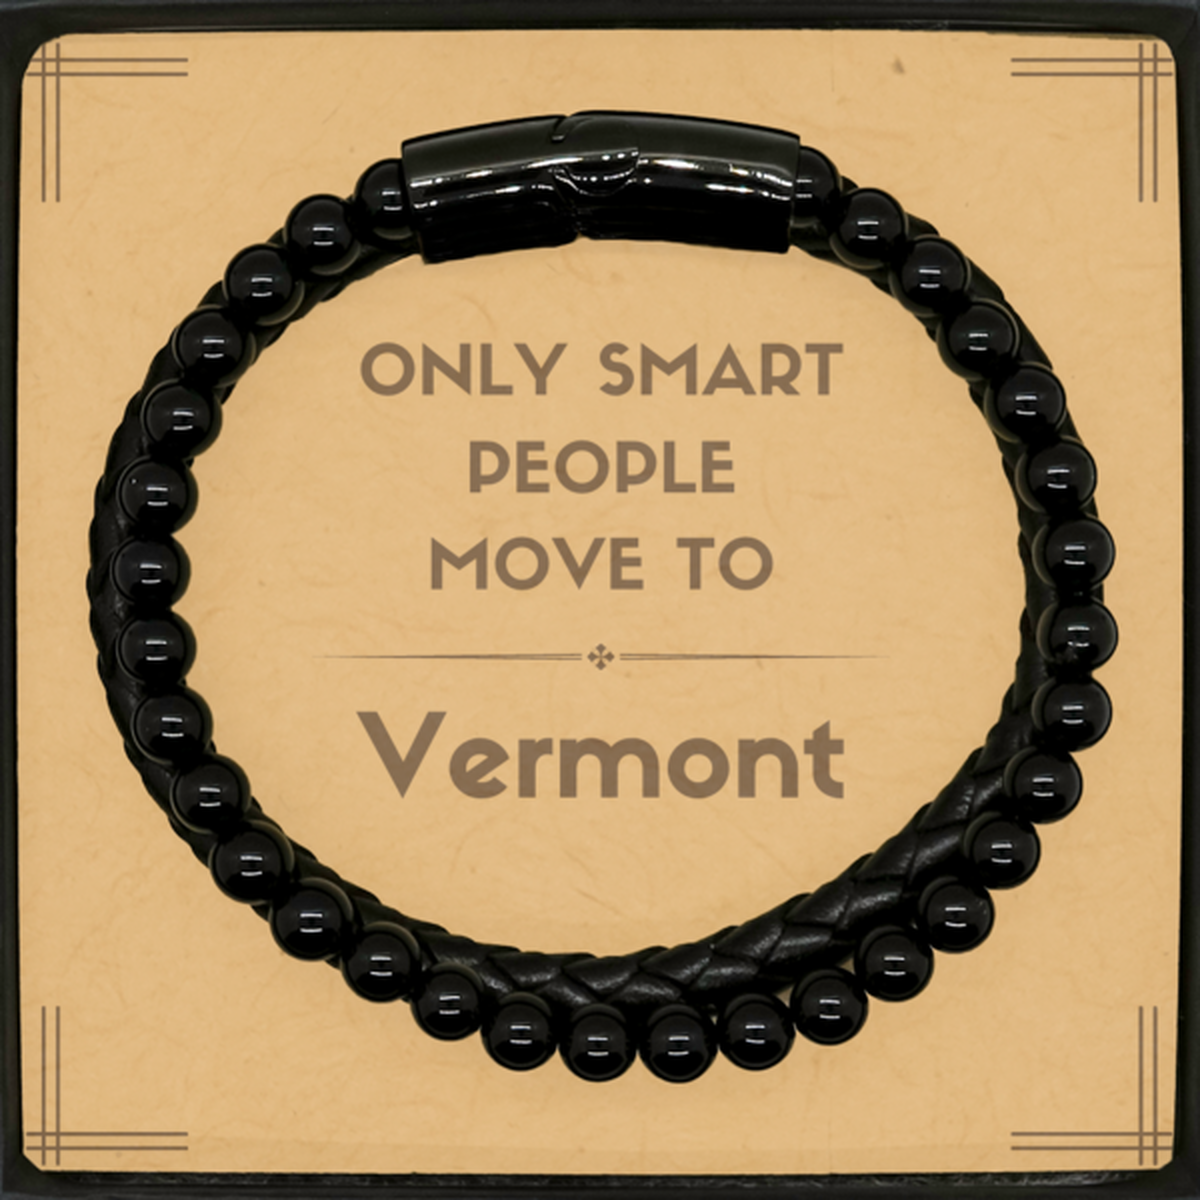 Only smart people move to Vermont Stone Leather Bracelets, Message Card Gifts For Vermont, Move to Vermont Gifts for Friends Coworker Funny Saying Quote